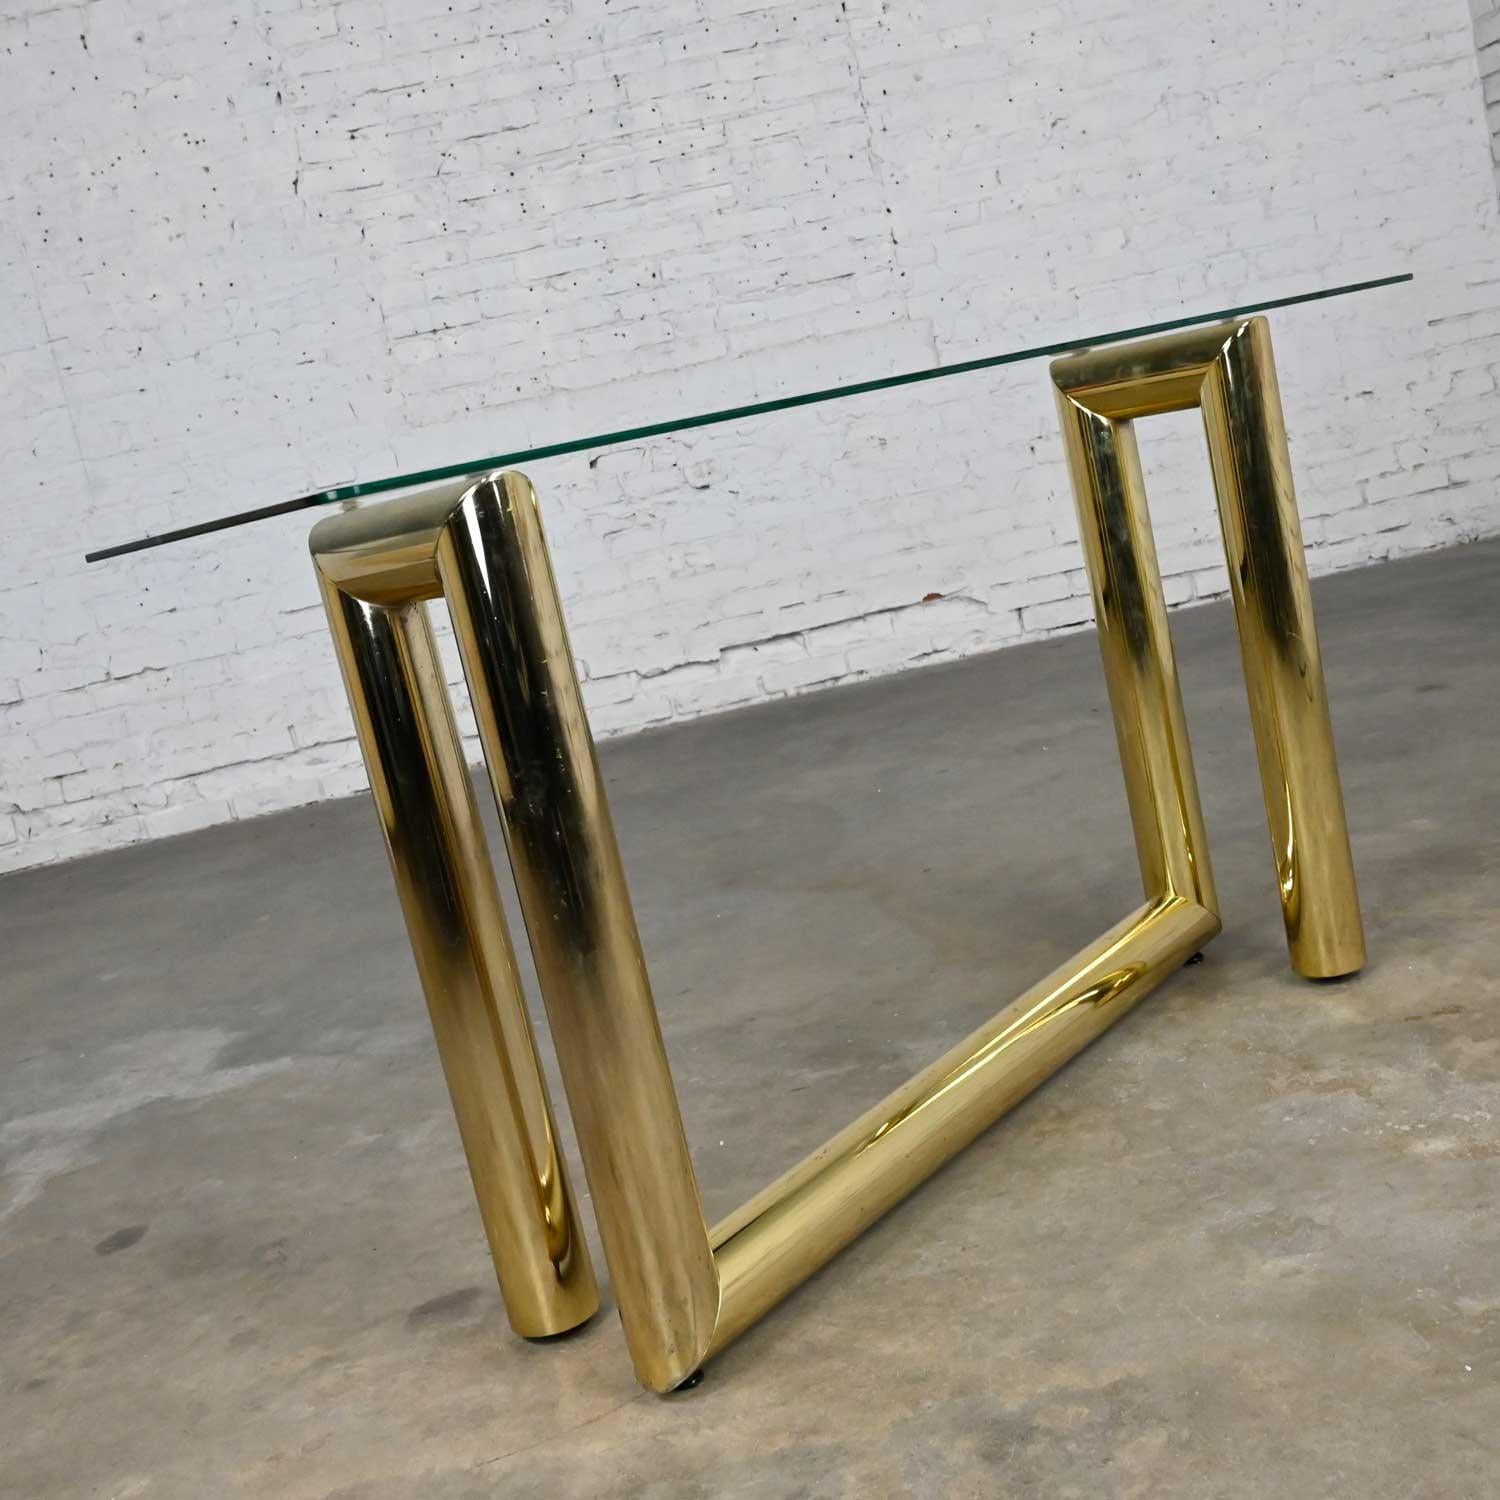 Gorgeous vintage modern brass plated console or sofa table with rectangular glass top in the style of Karl Springer. Beautiful condition, keeping in mind that this is vintage and not new so will have signs of use and wear. There are 3 small chips in